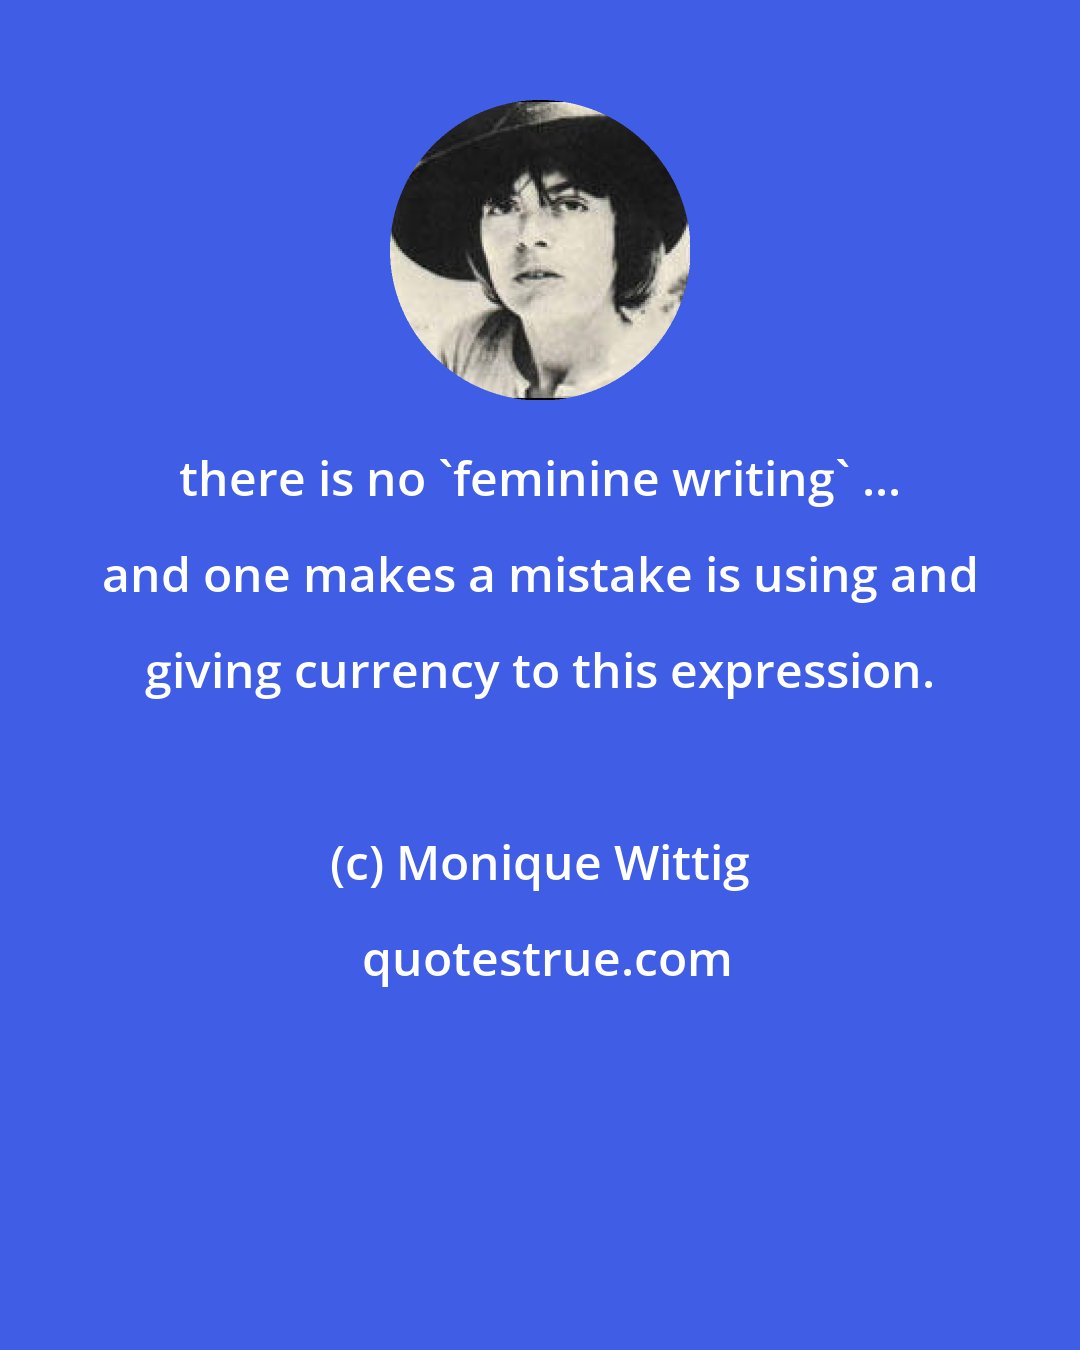 Monique Wittig: there is no 'feminine writing' ... and one makes a mistake is using and giving currency to this expression.